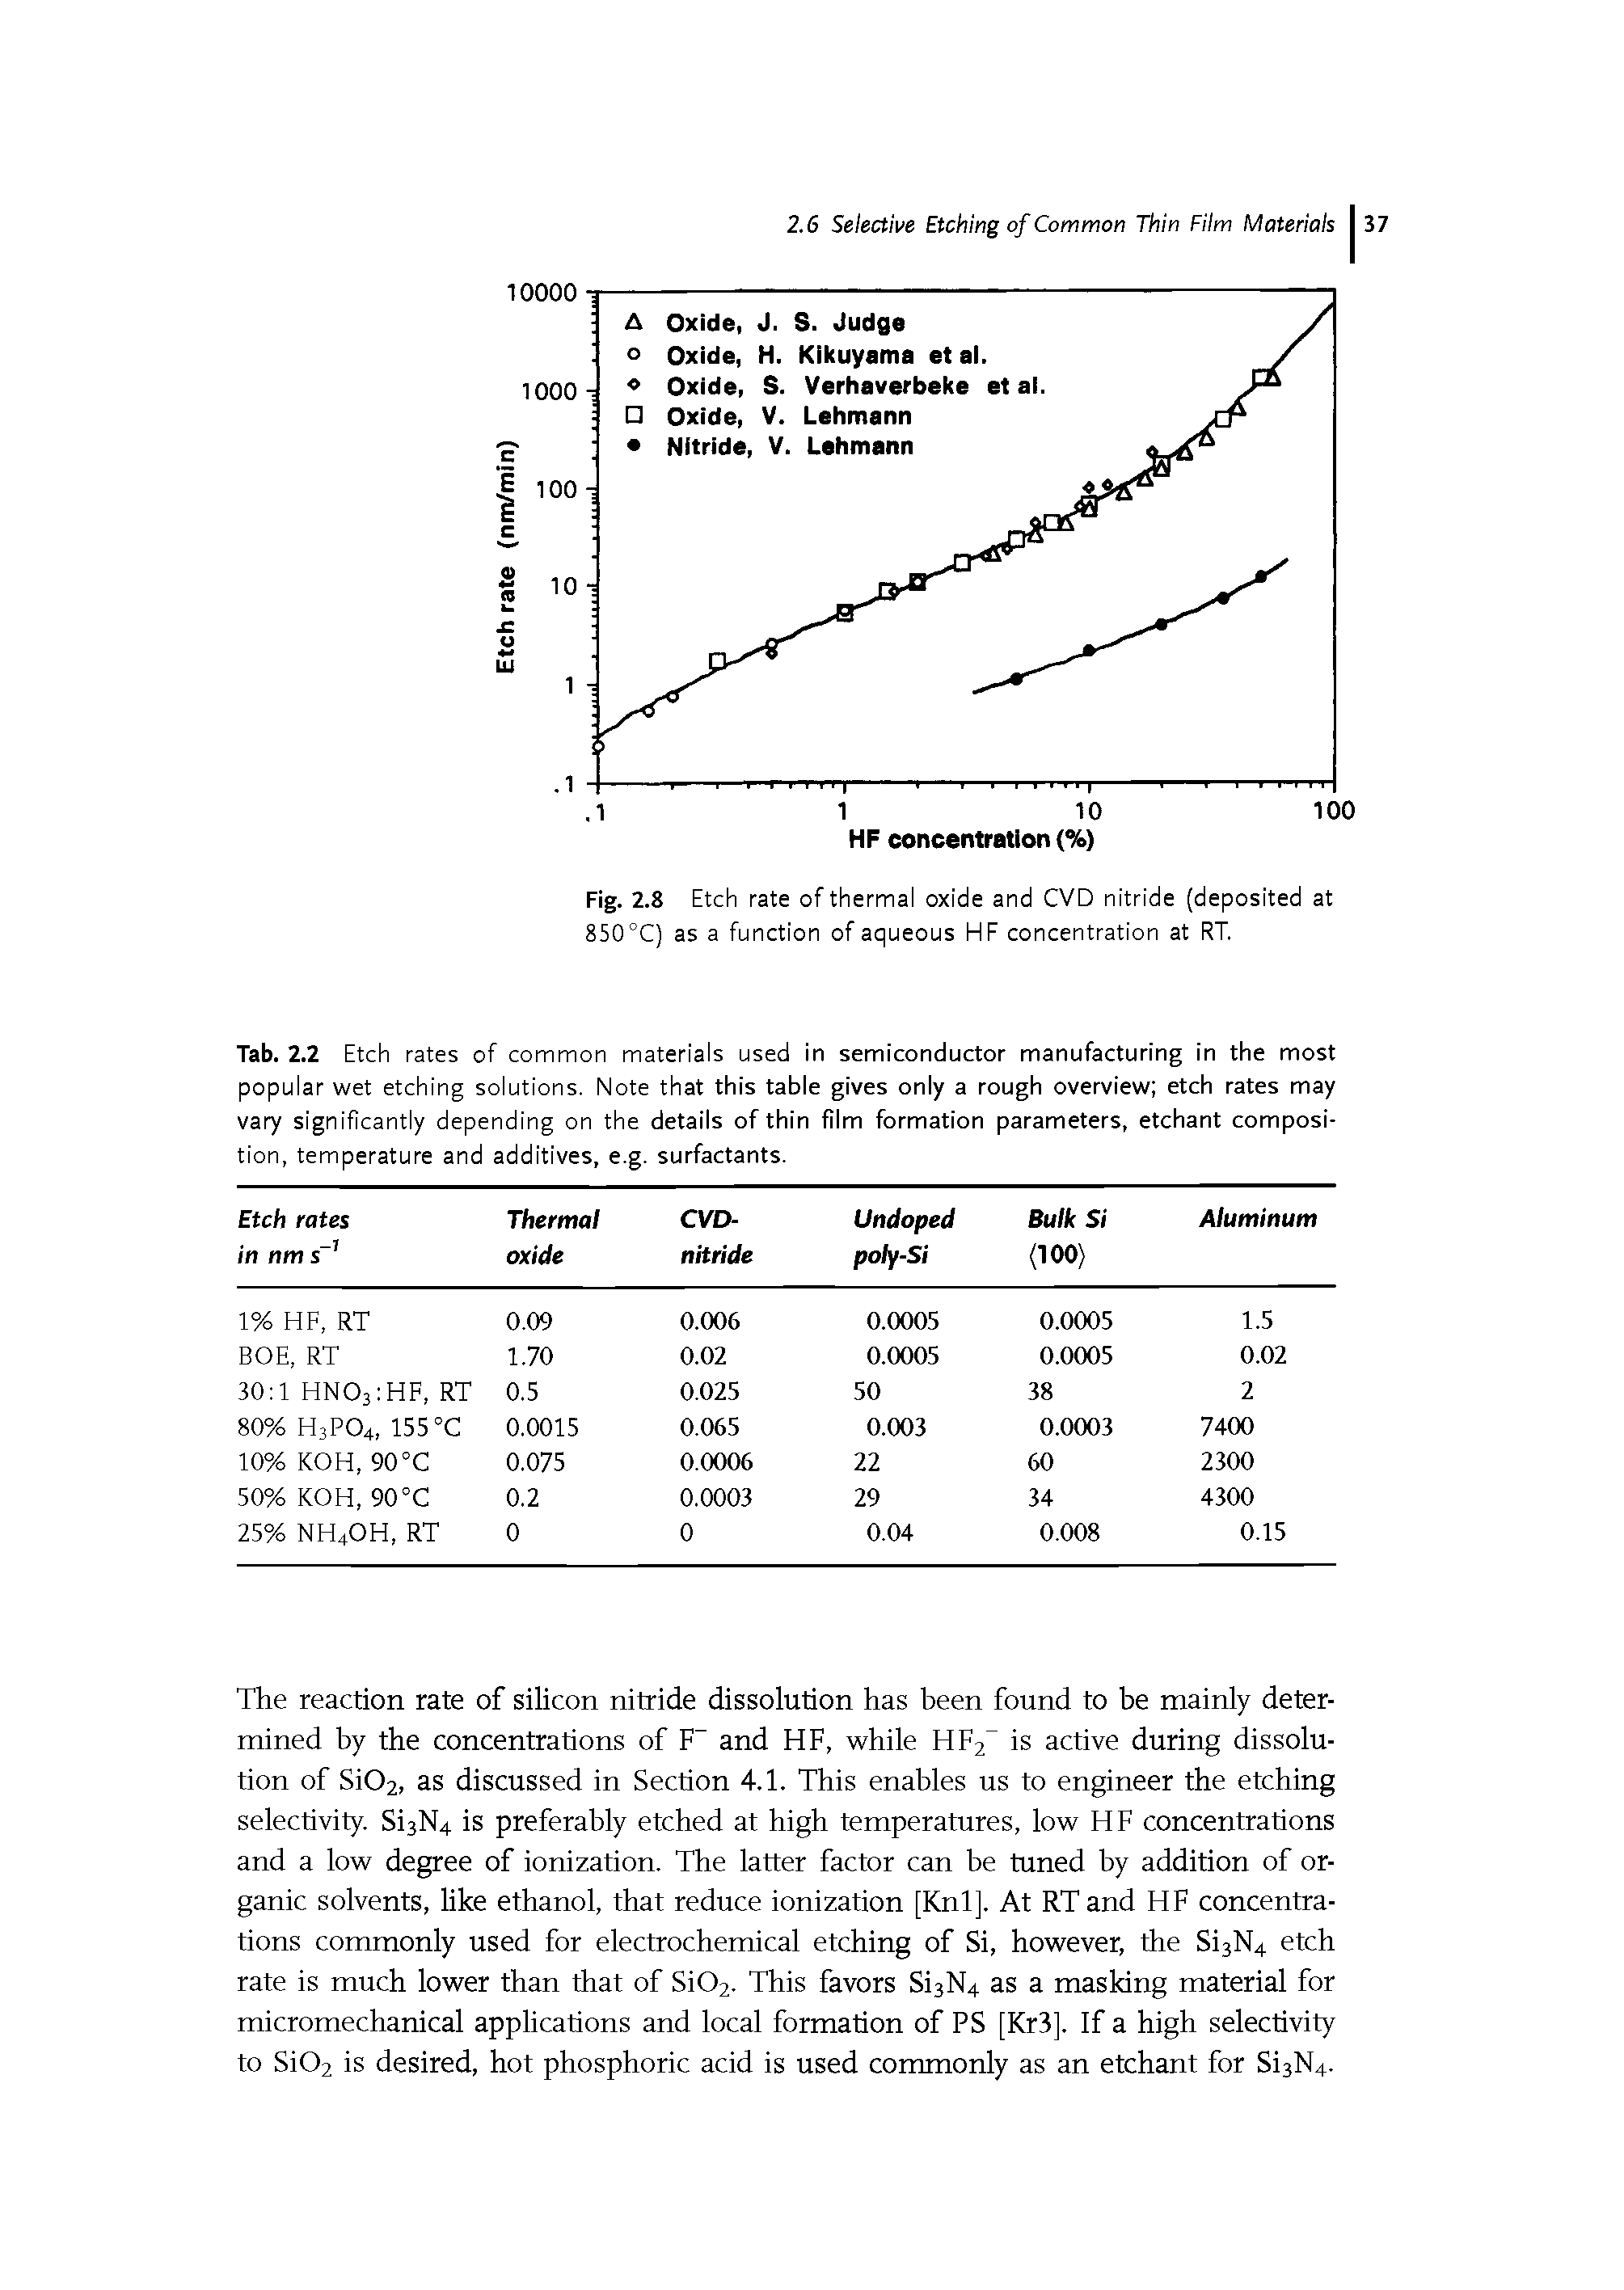 Fig. 2.8 Etch rate of thermal oxide and CVD nitride (deposited at 850 °C) as a function of aqueous HF concentration at RT.